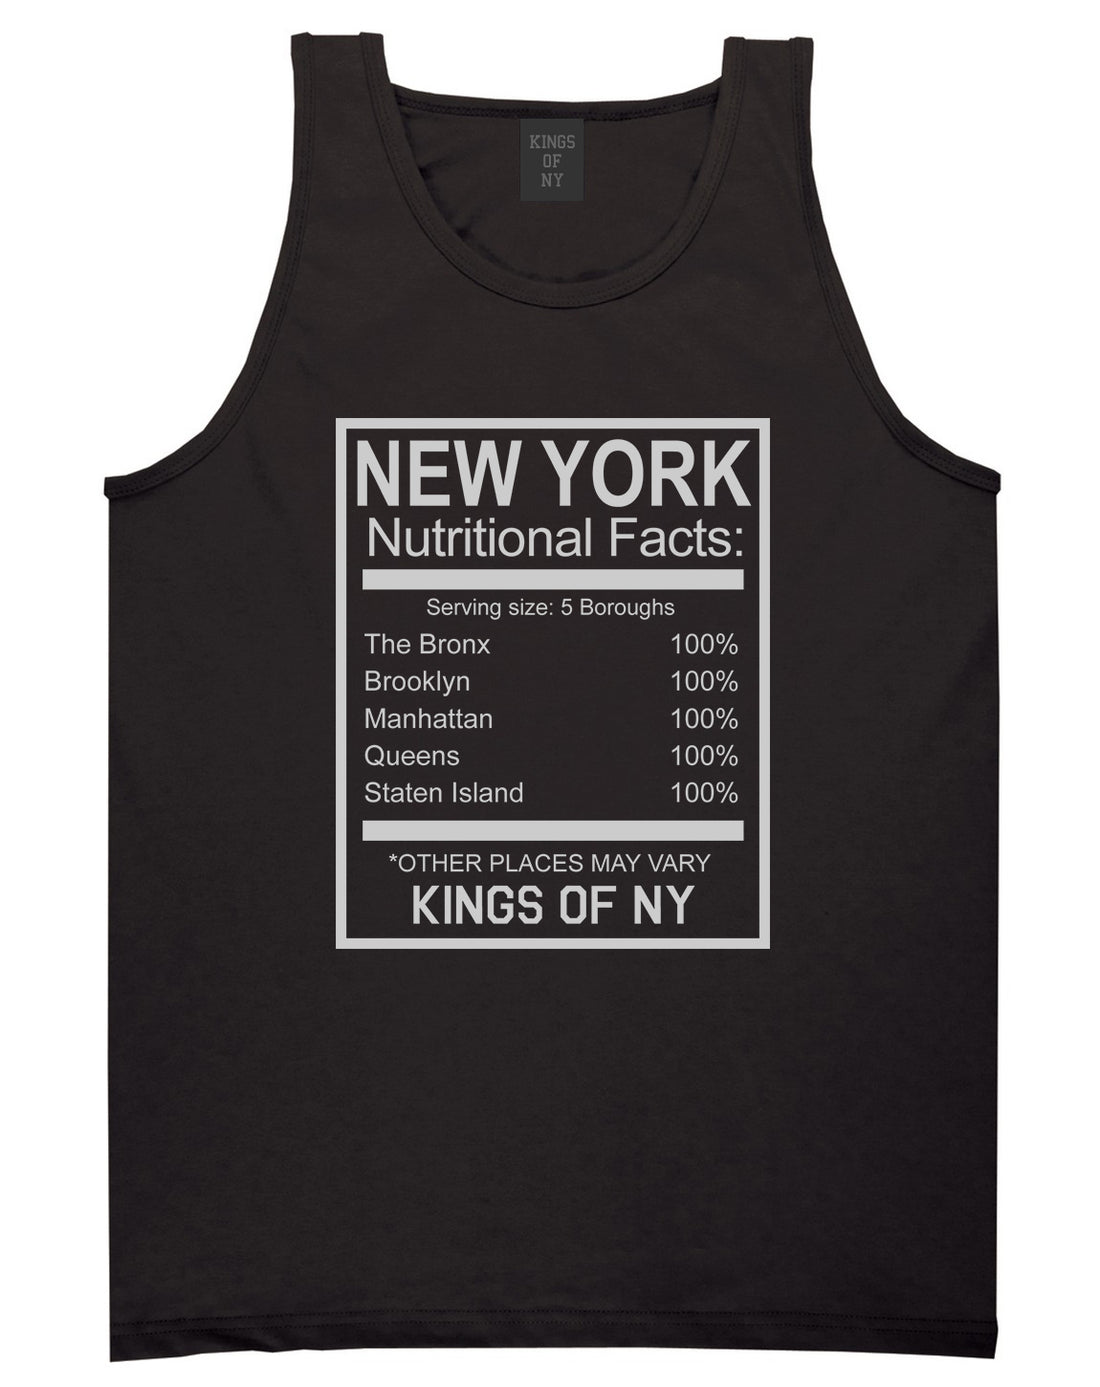 New York Nutritional Facts Tank Top Shirt in Black